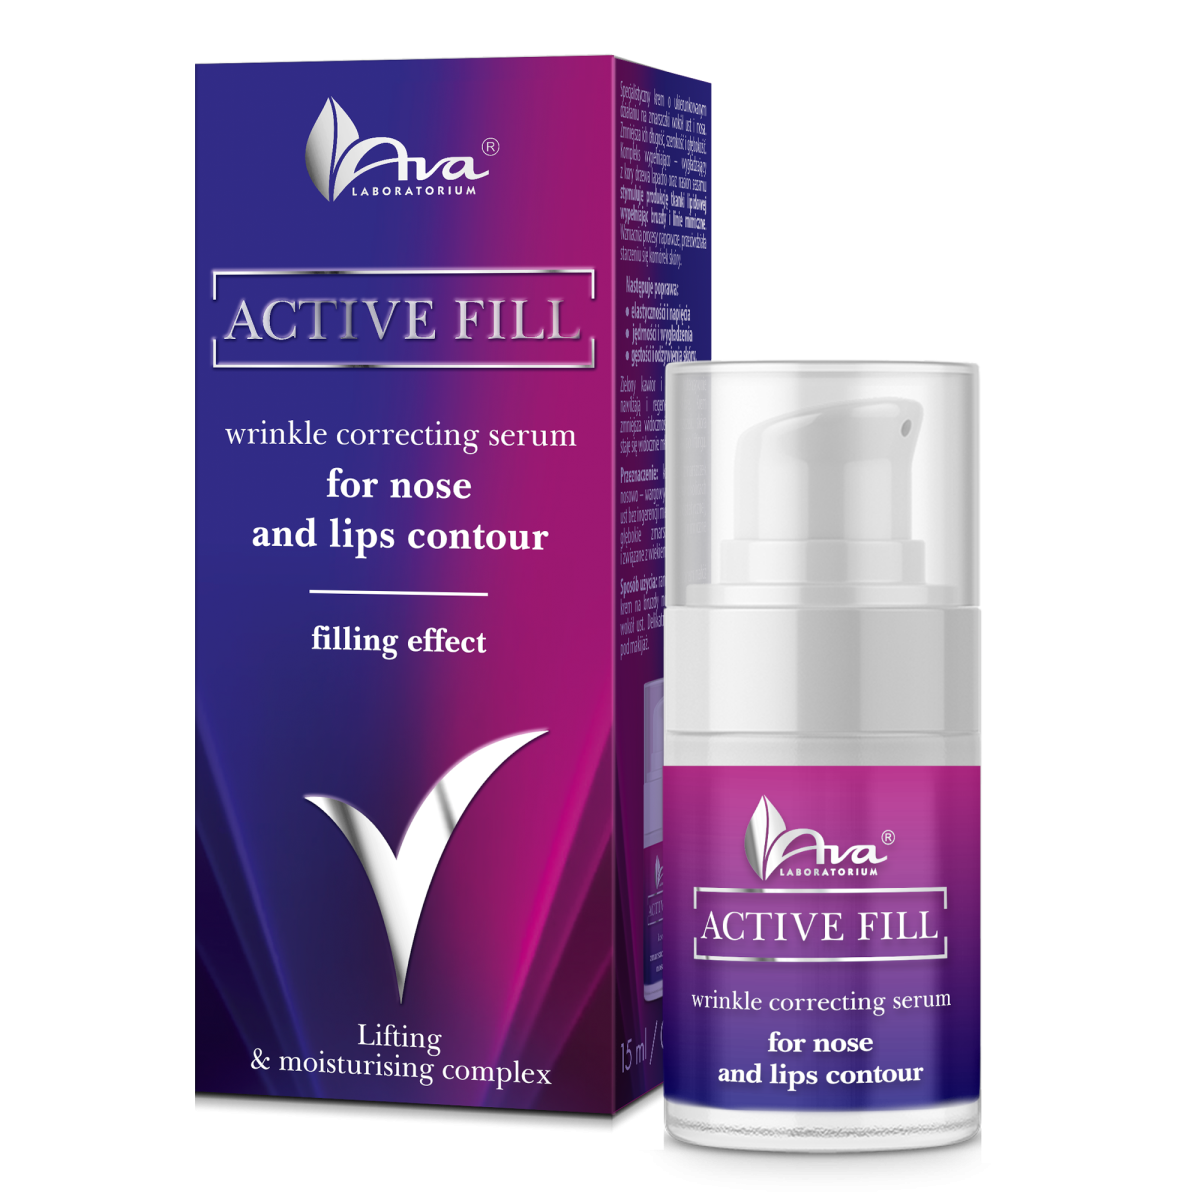 Active Fill – Wrinkle correcting serum for nose and lips contour